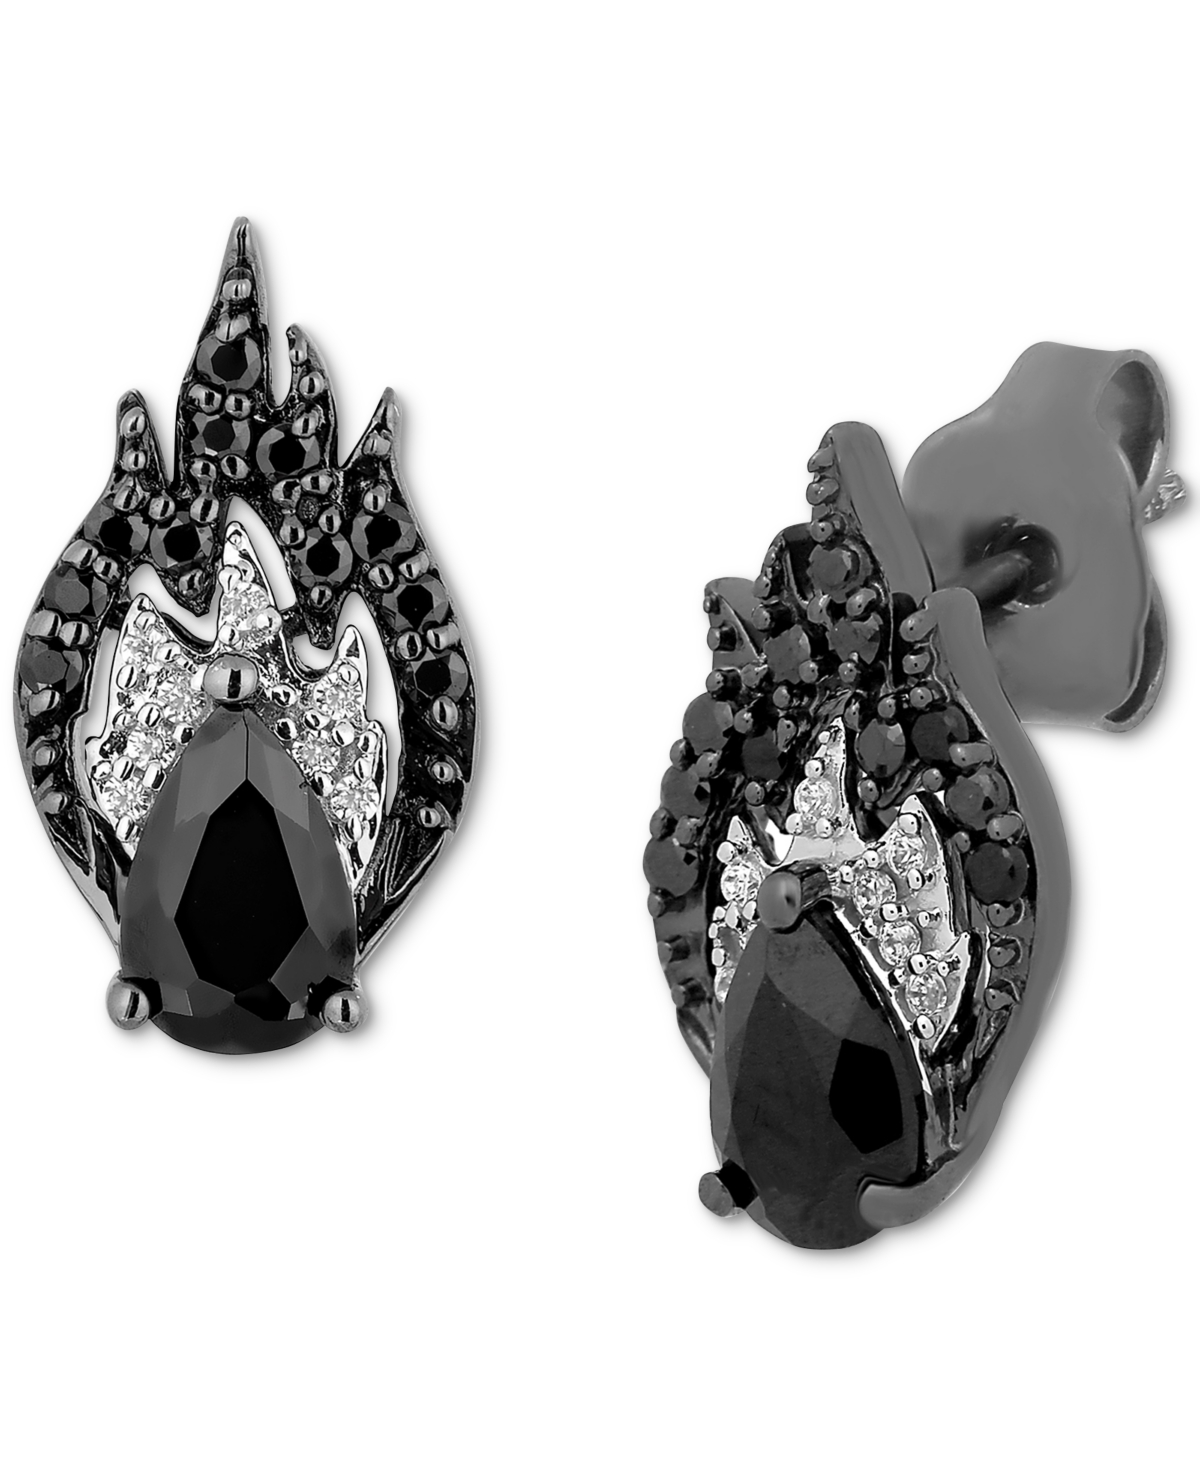 Onyx & Black & White Diamond (1/5 ct. t.w.) Villains Maleficent Stud Earrings in Black Rhodium Plated Sterling Silver -